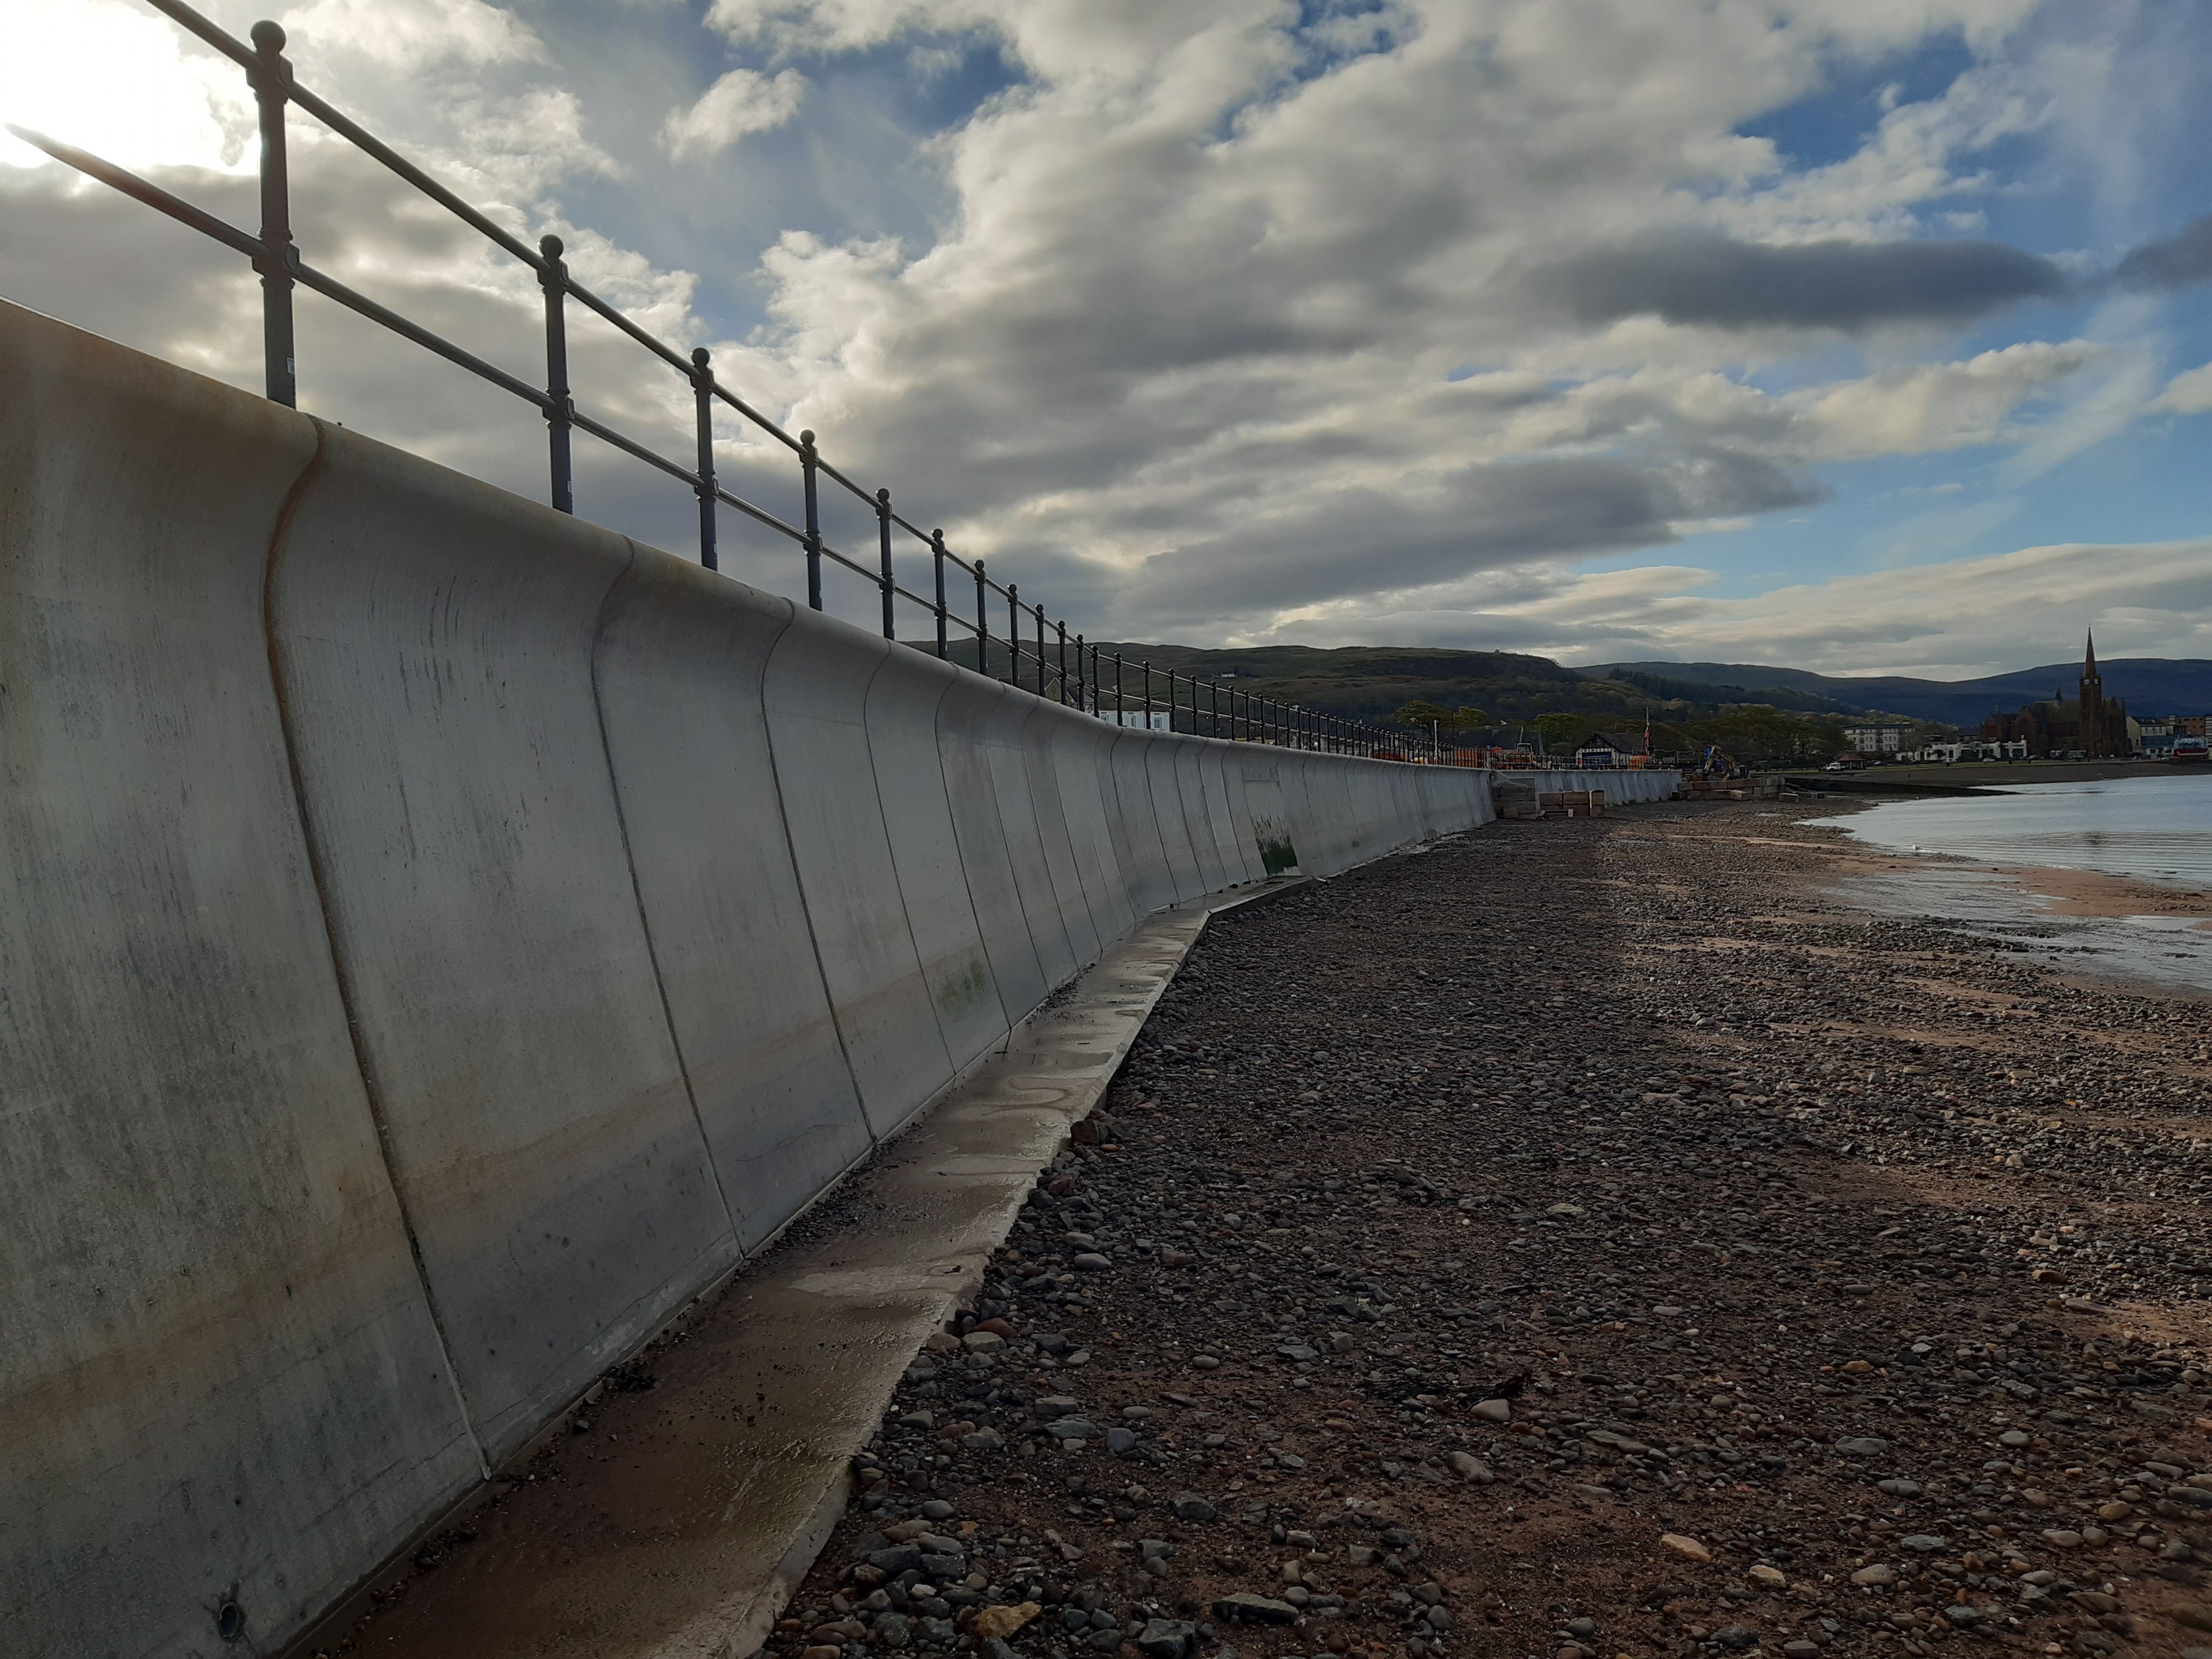 Construction work on Largs seawall in the final stages